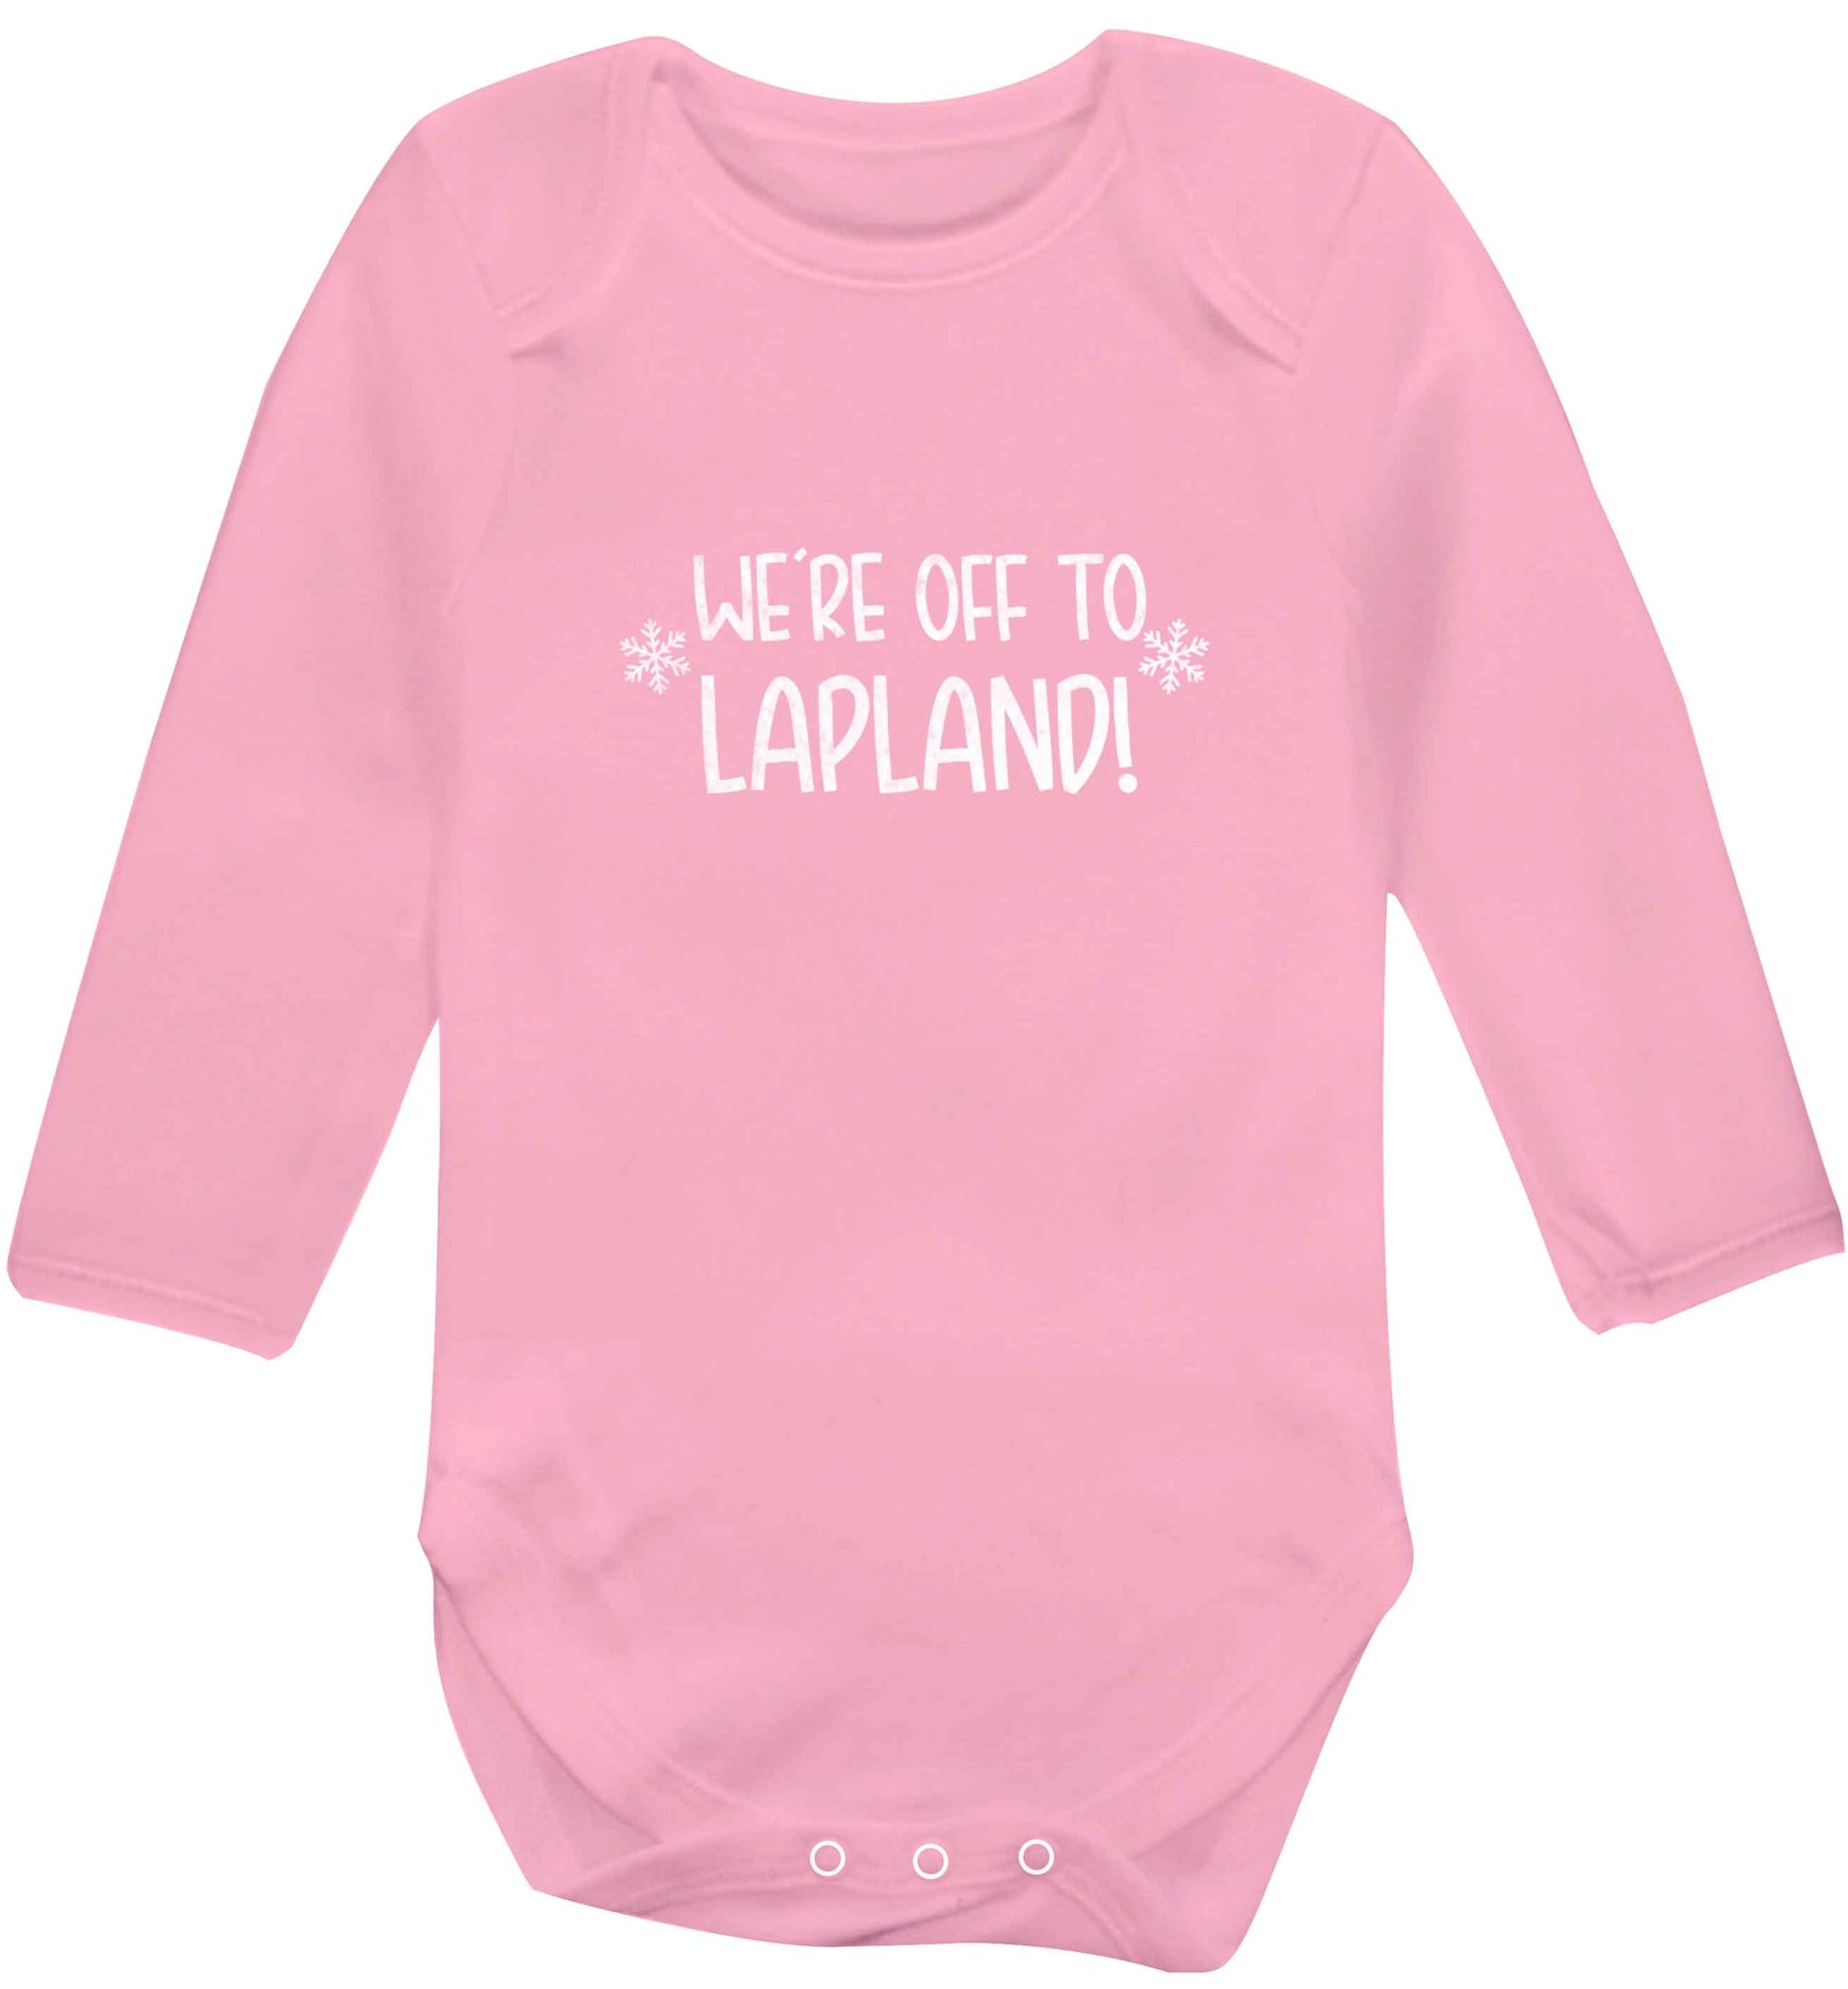 We're off to Lapland baby vest long sleeved pale pink 6-12 months